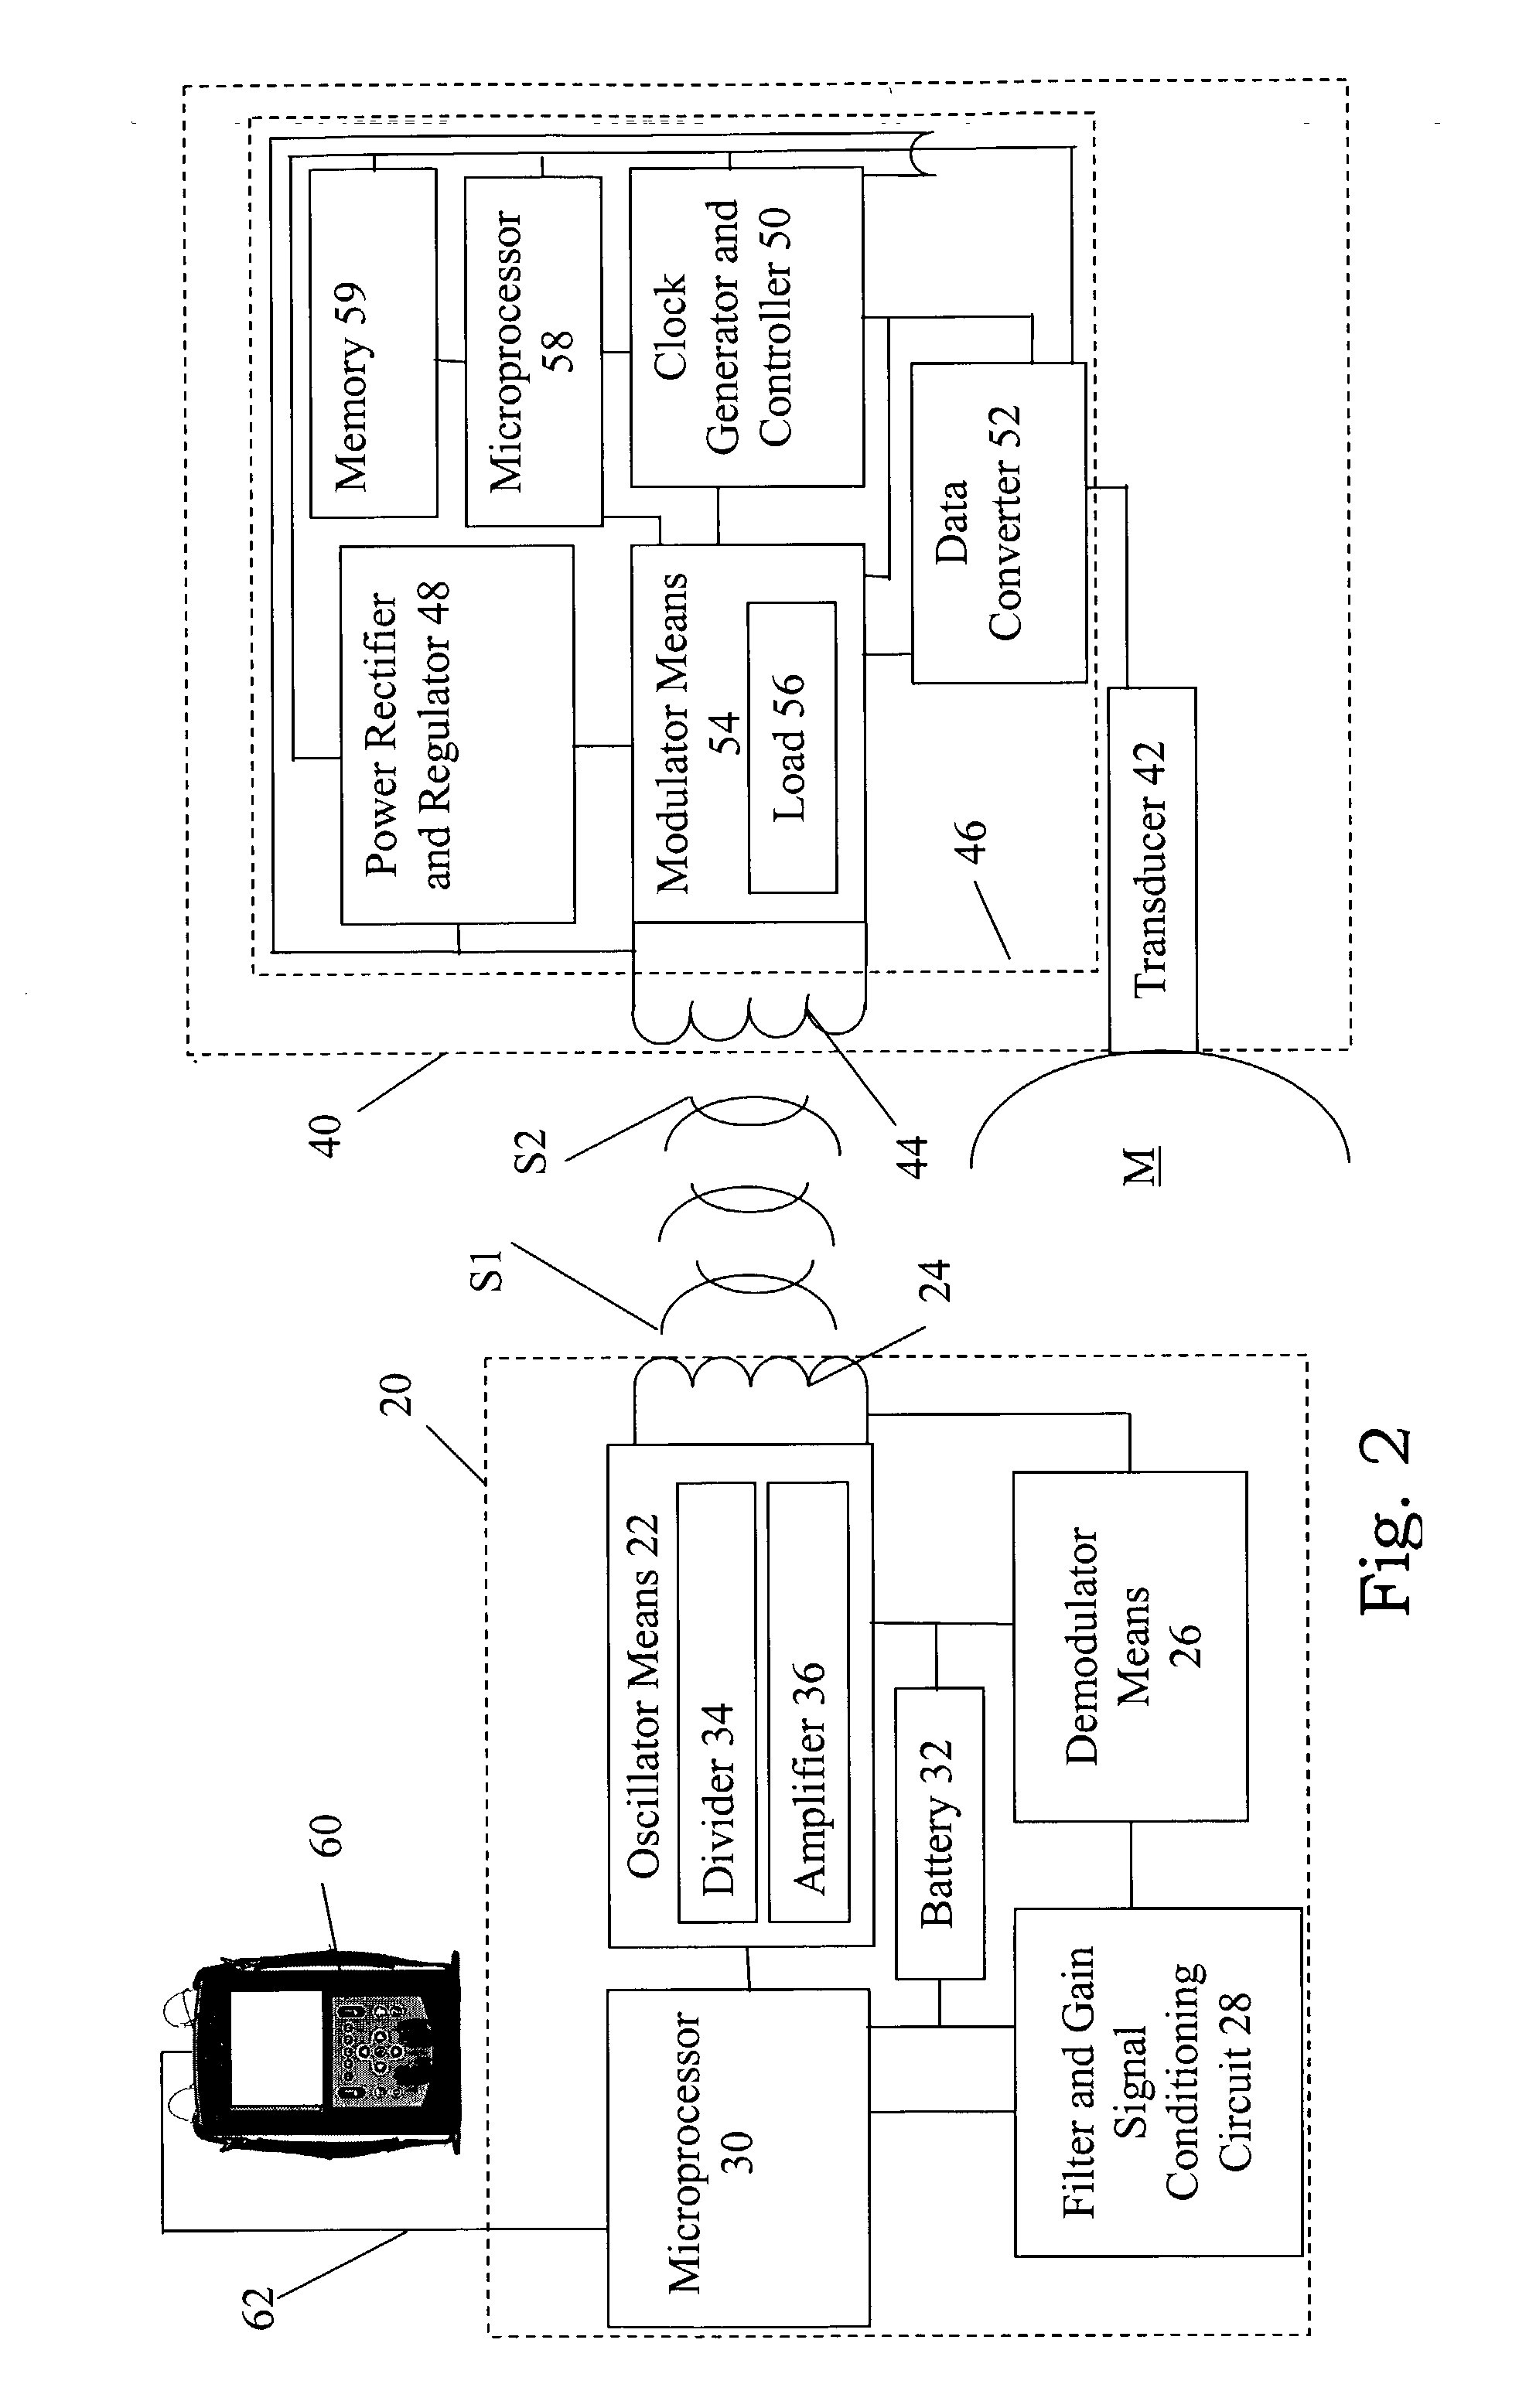 Wireless, battery-less, asset sensor and communication system: apparatus and method